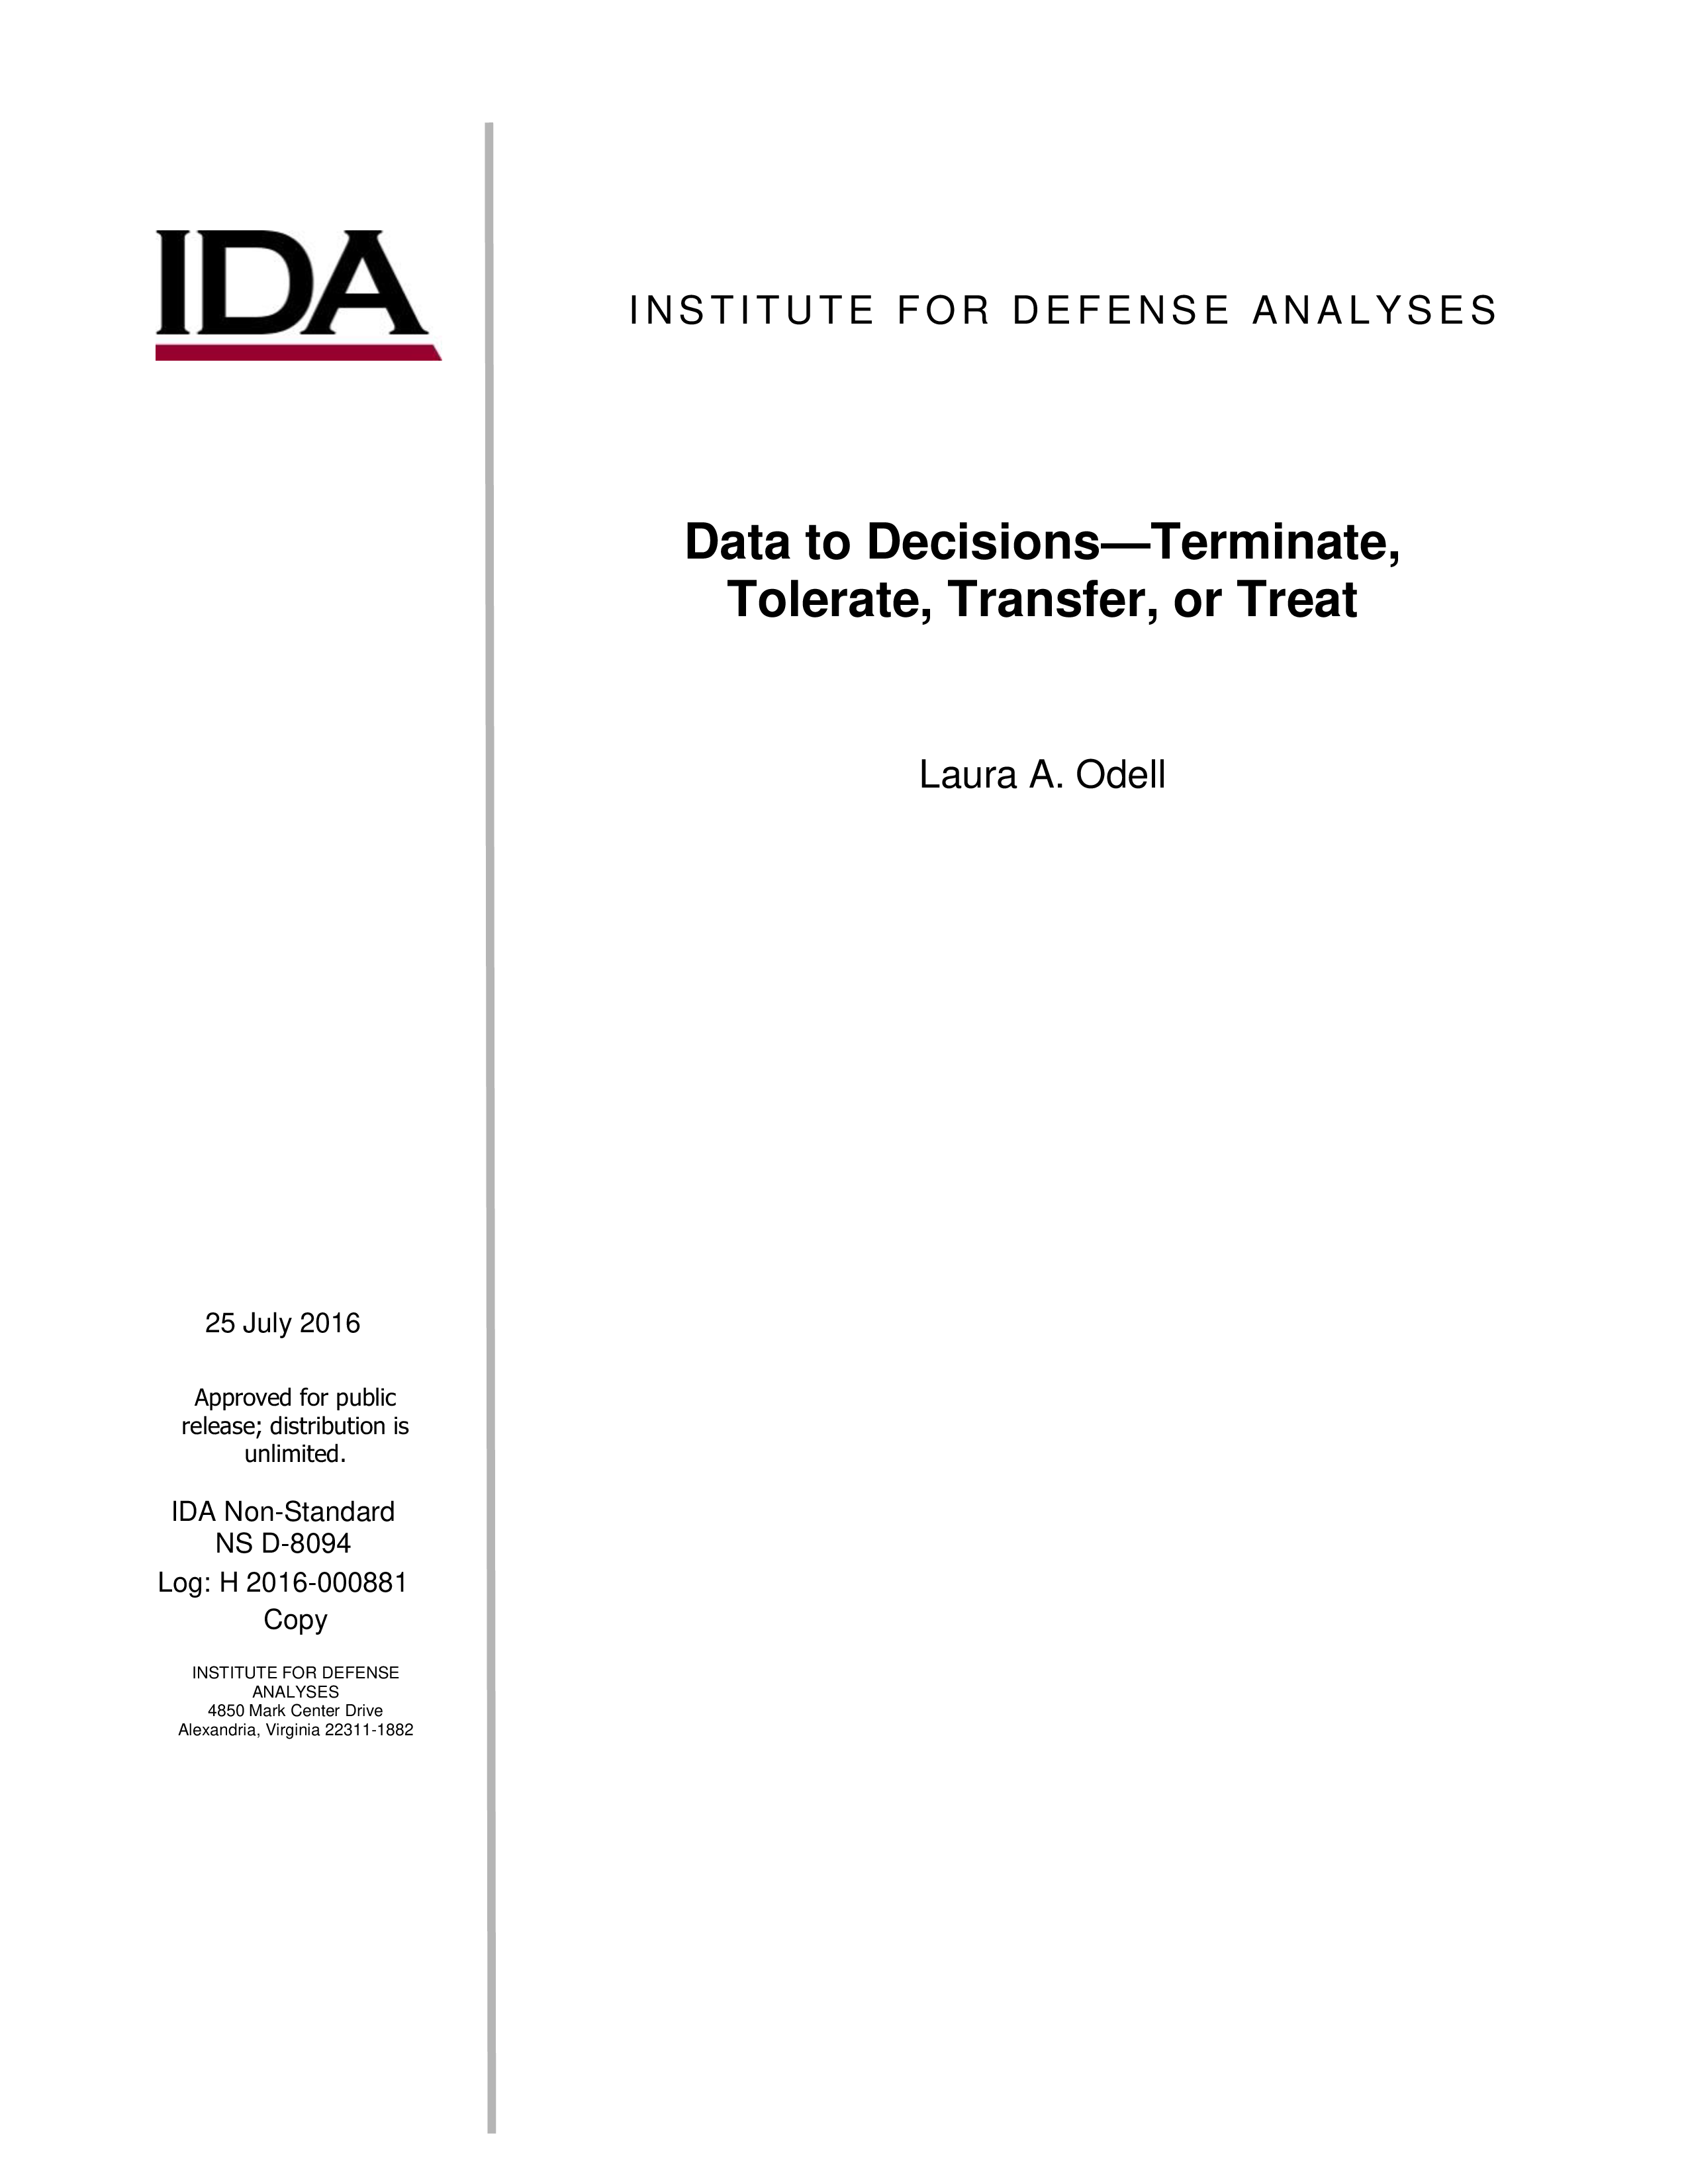 Data to Decisions—Terminate, Tolerate, Transfer, or Treat